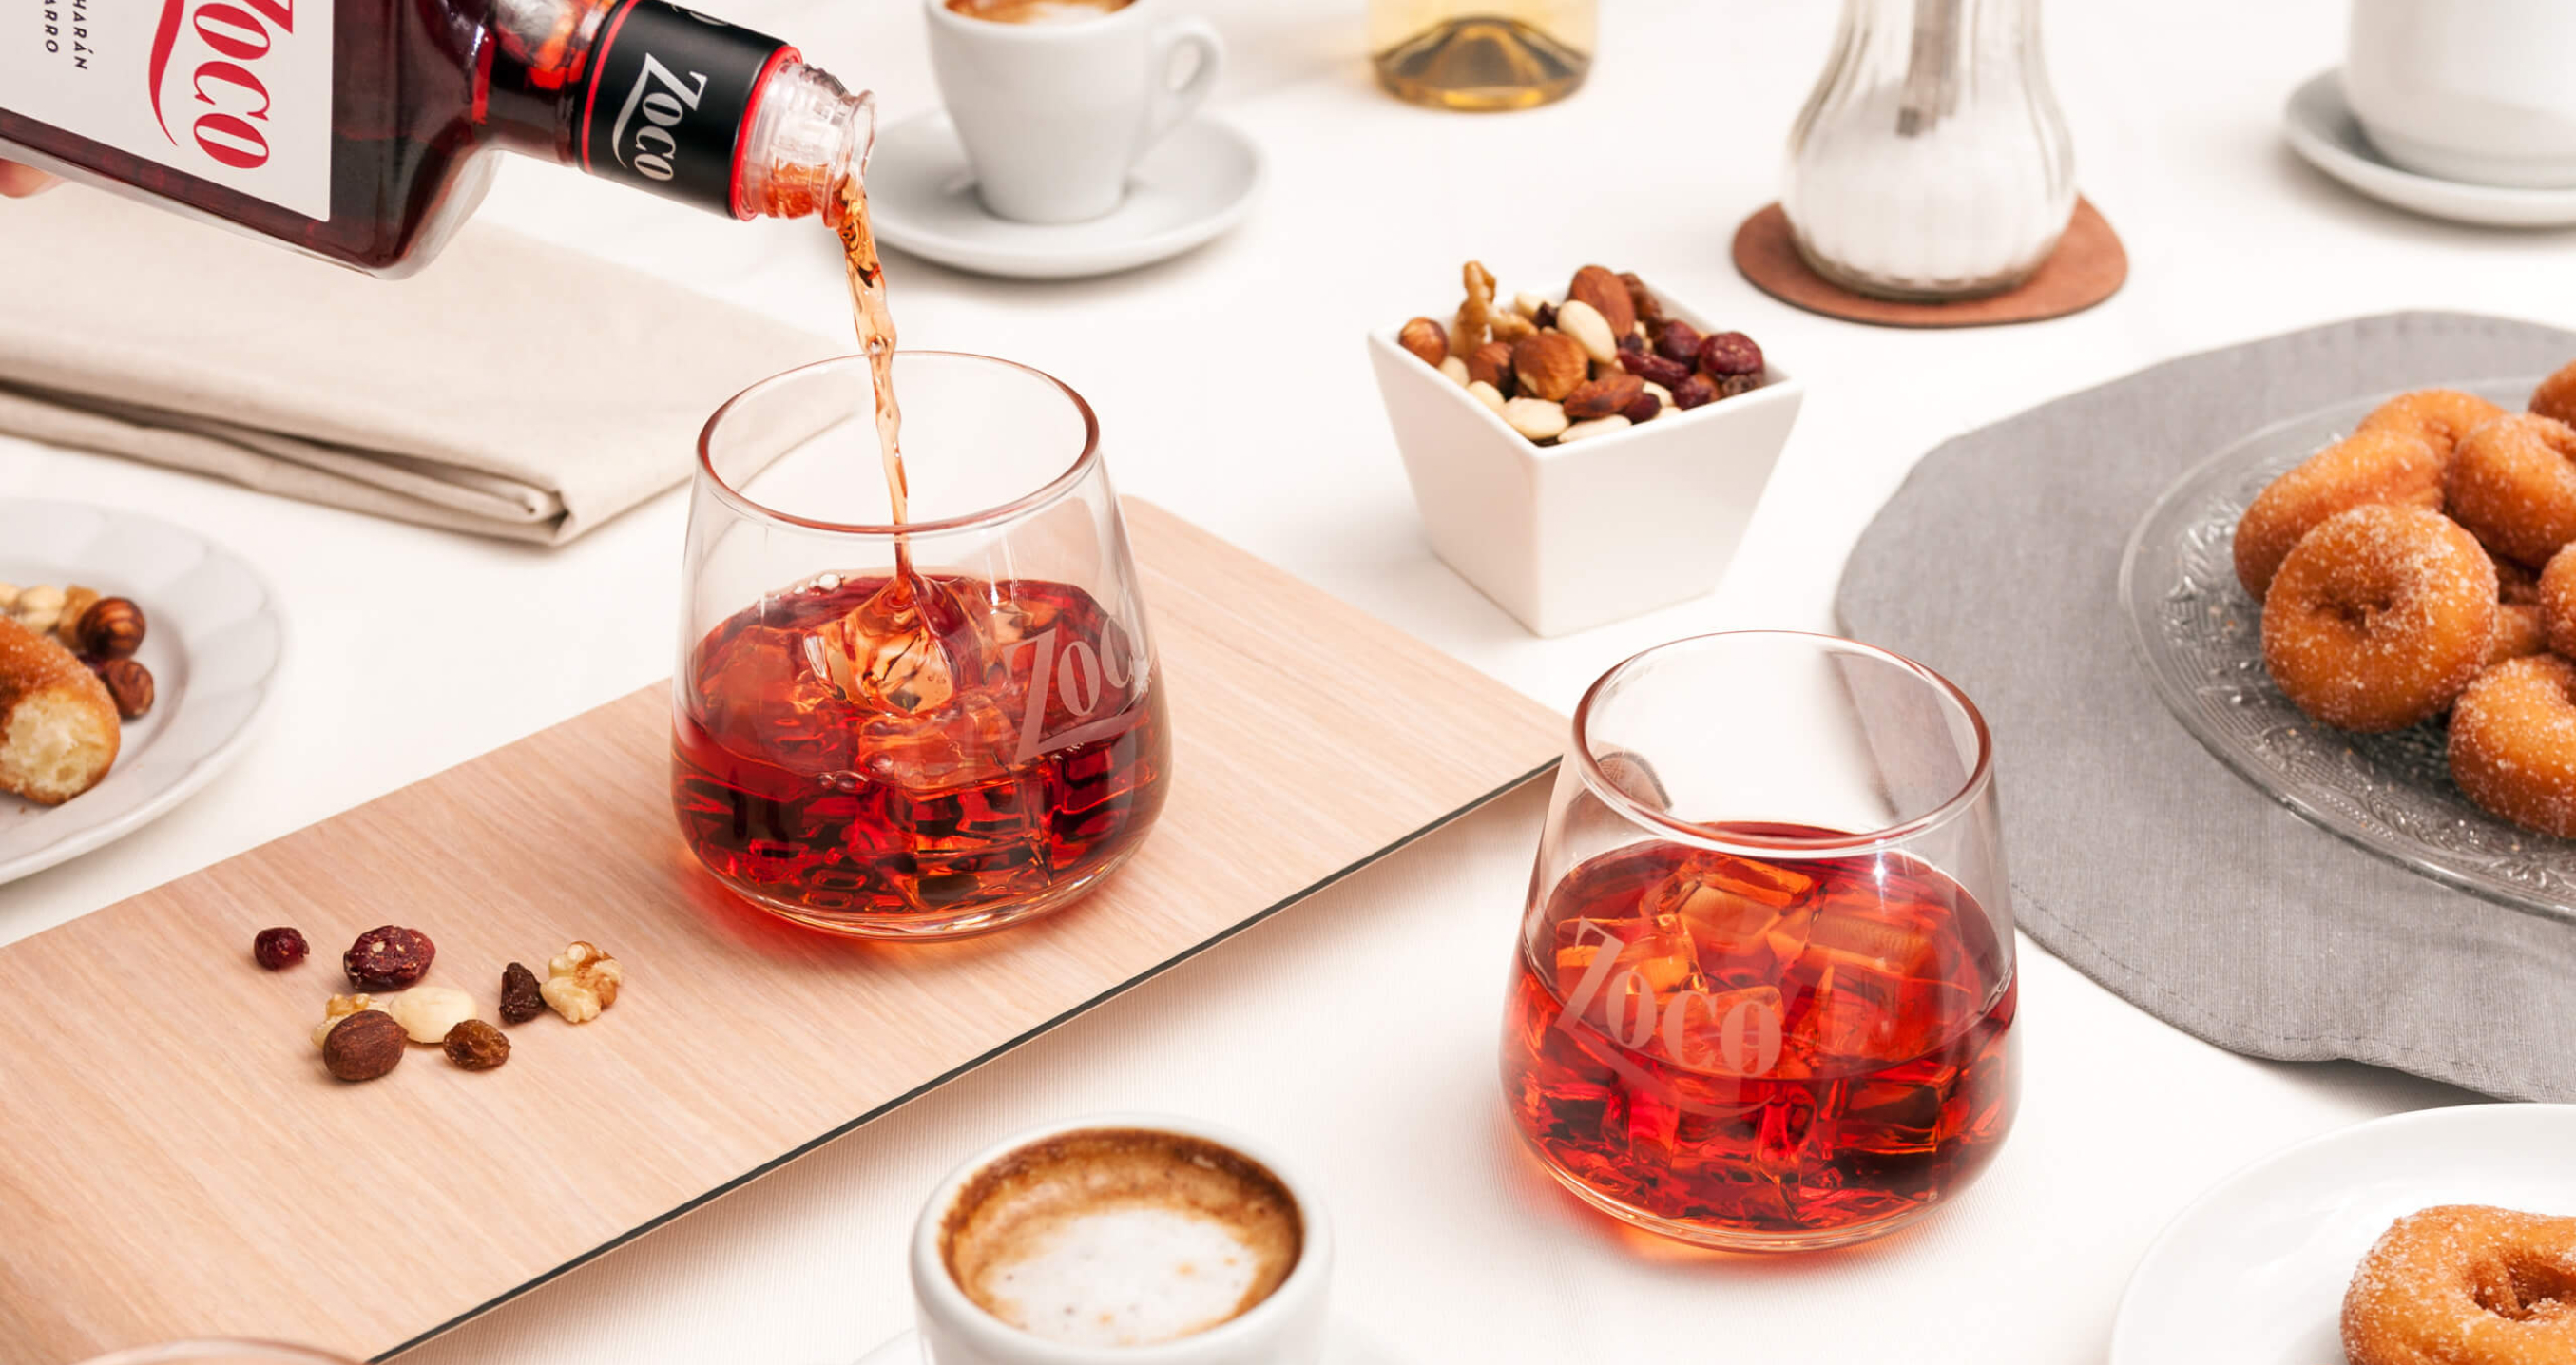 Zoco is a patxaran brand with more than 60 years of history. The Navarrese elixir delights the palate and is a centrepiece around which to gather to talk, laugh and build unforgettable moments.
